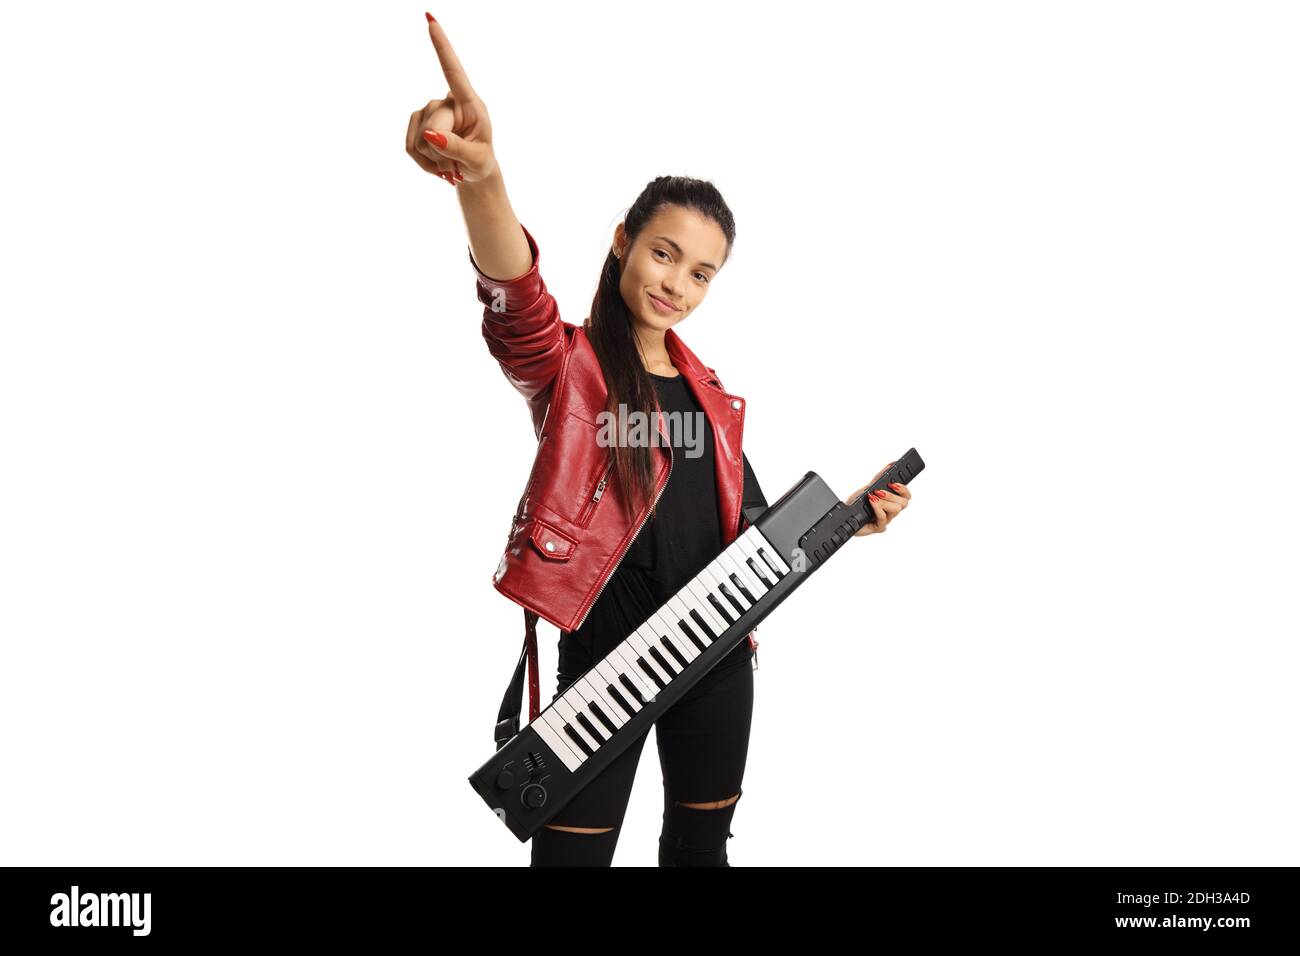 Young woman in a leather jacket with a keytar synthesizer pointing up isolated on white background Stock Photo